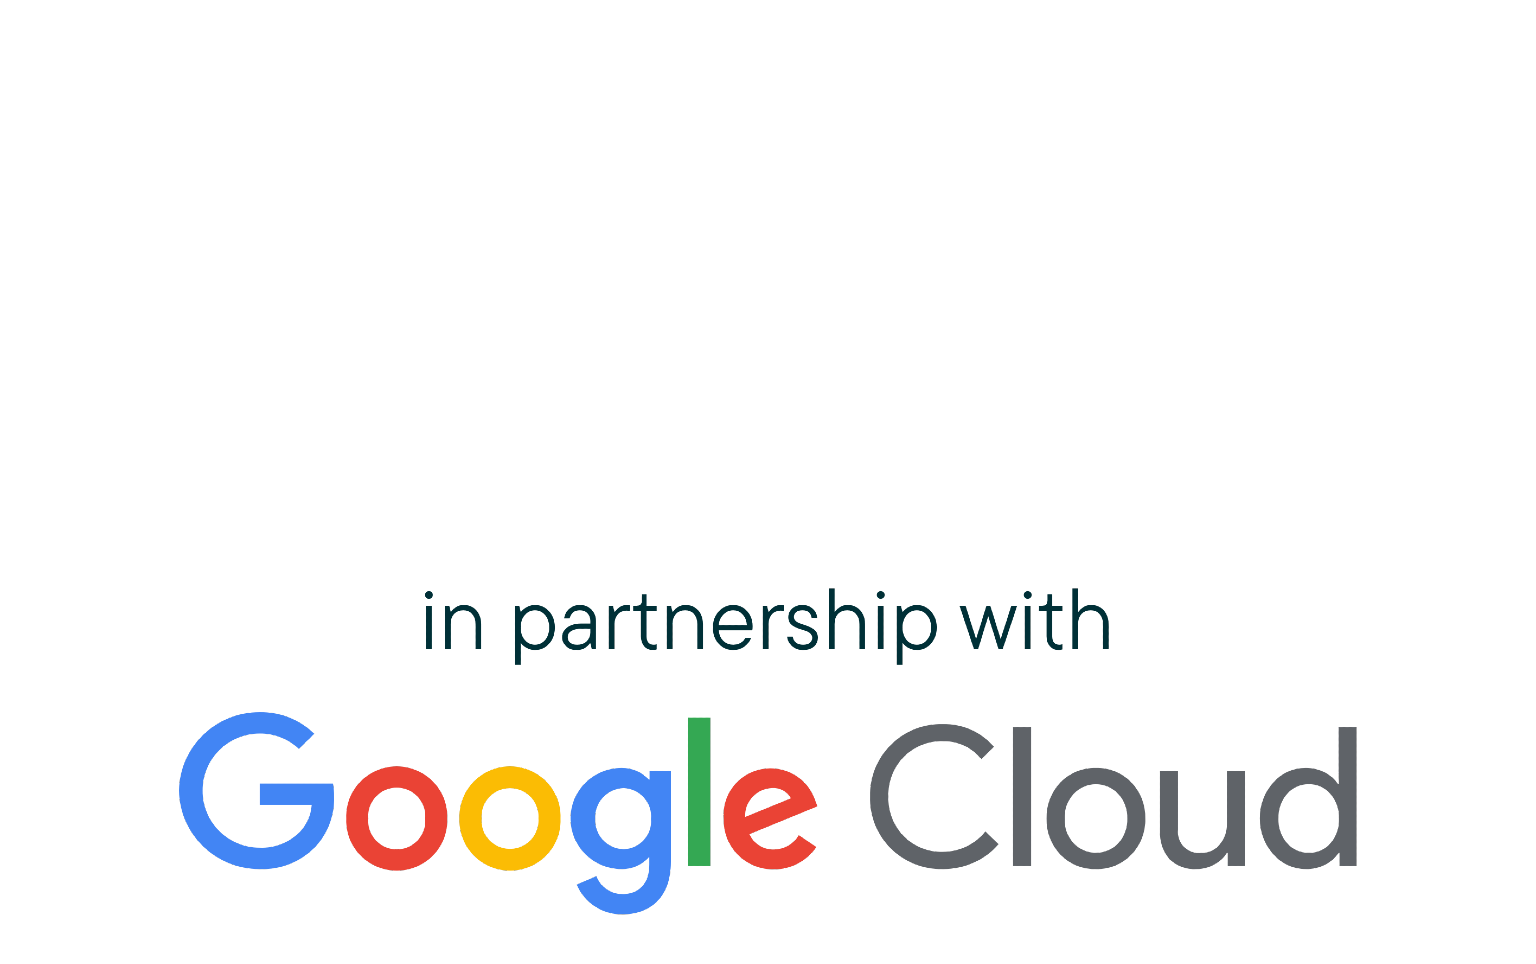 commercetools in partnership with Google Cloud